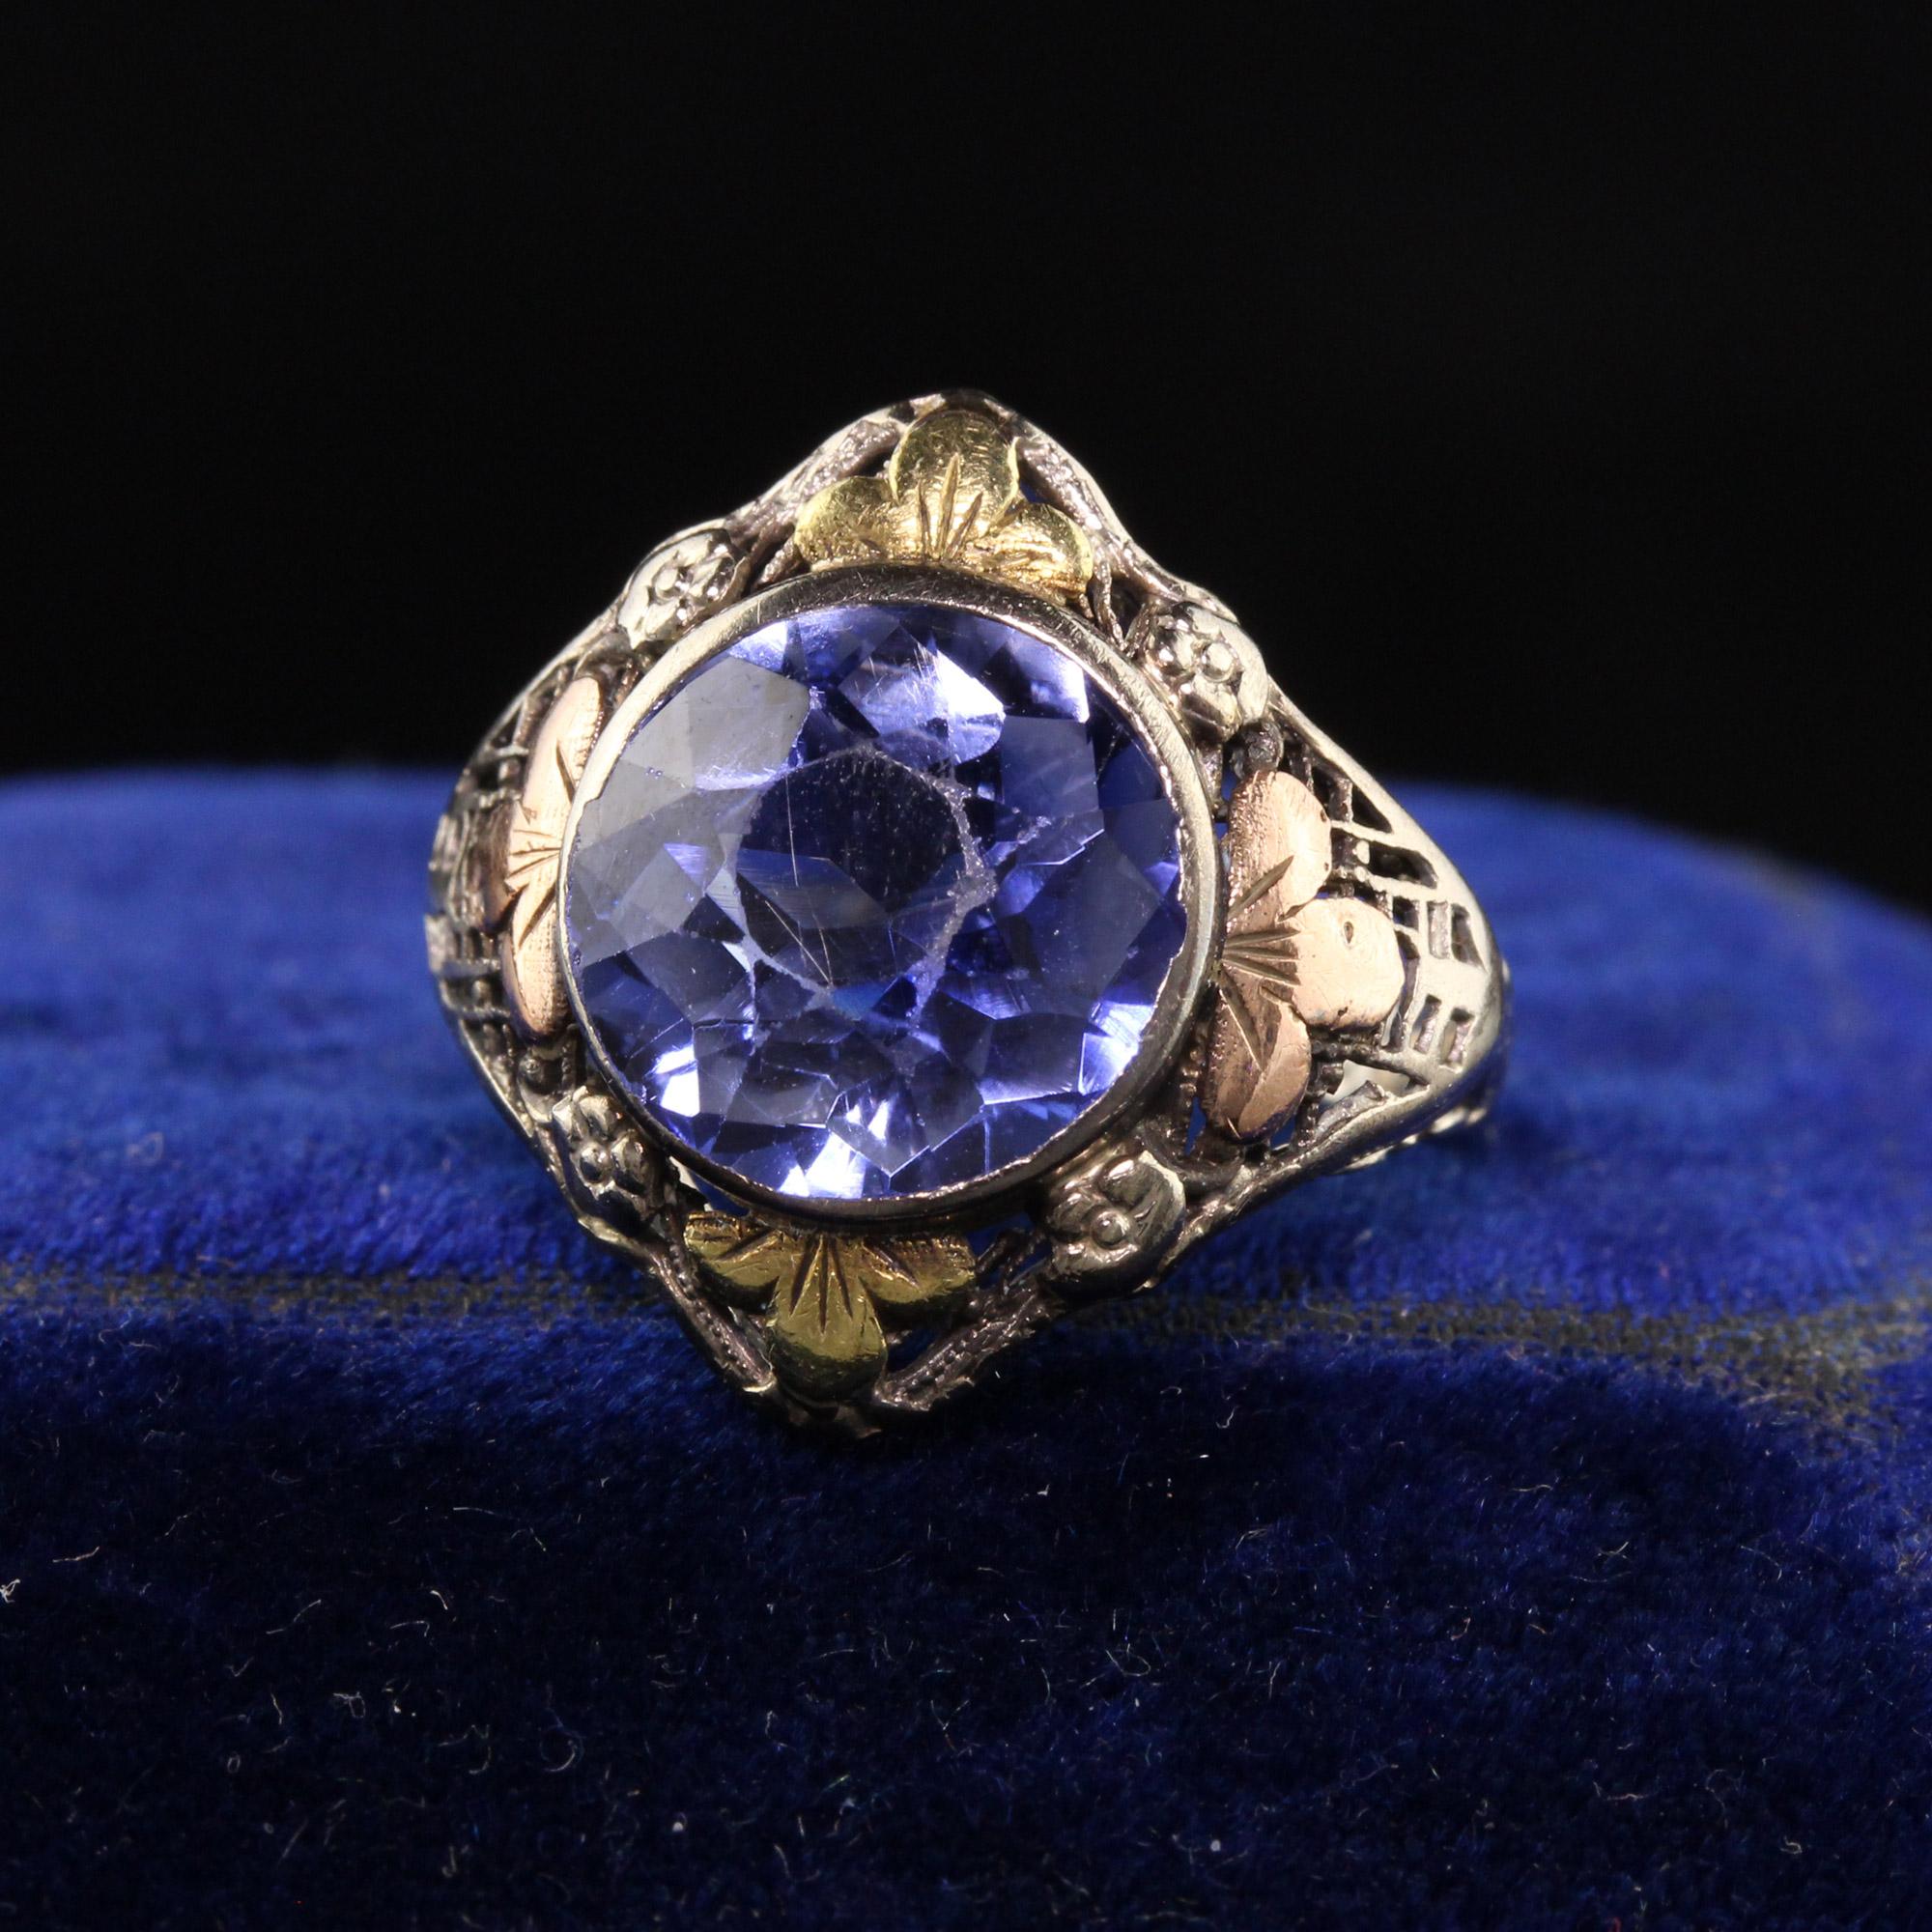 Beautiful Antique Art Deco 14K White Gold Tri Gold Filigree Ring.This beautiful art deco ring has a synthetic sapphire set in the center of a gorgeous mounting with yellow, white, and rose gold accents.

Item #R0991

Metal: 14K White Gold with